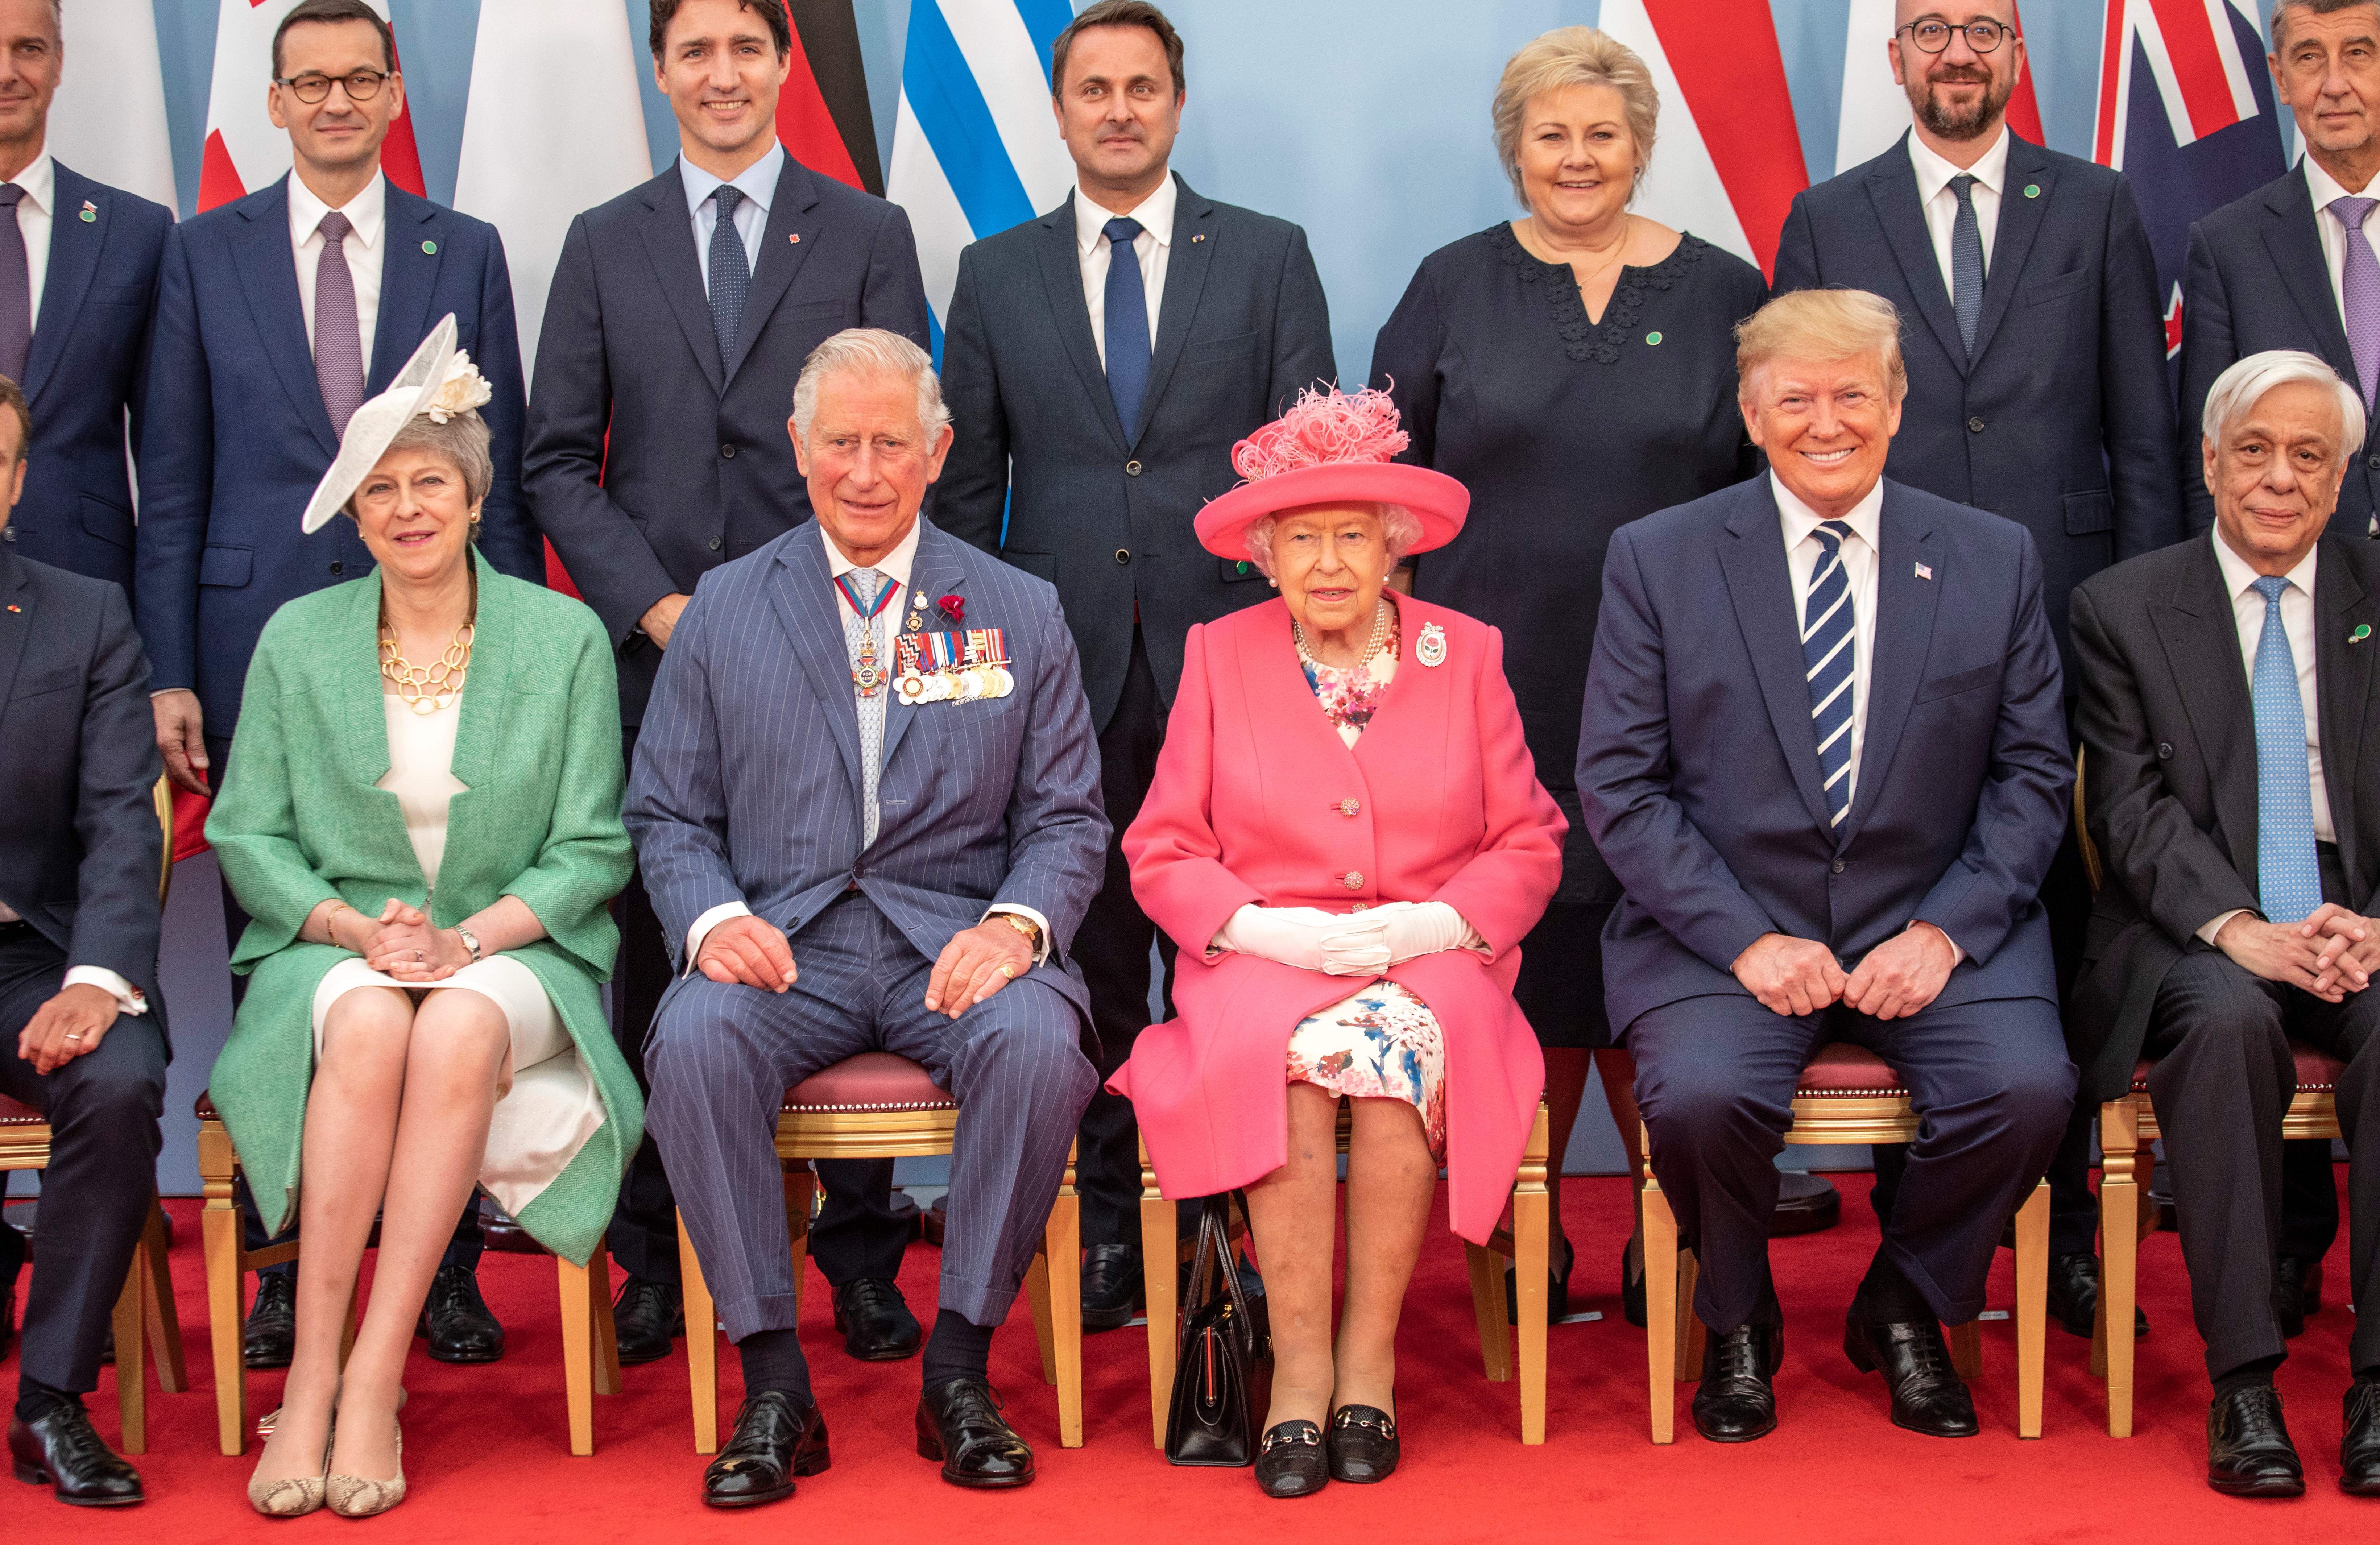 World leaders at D-Day celebration